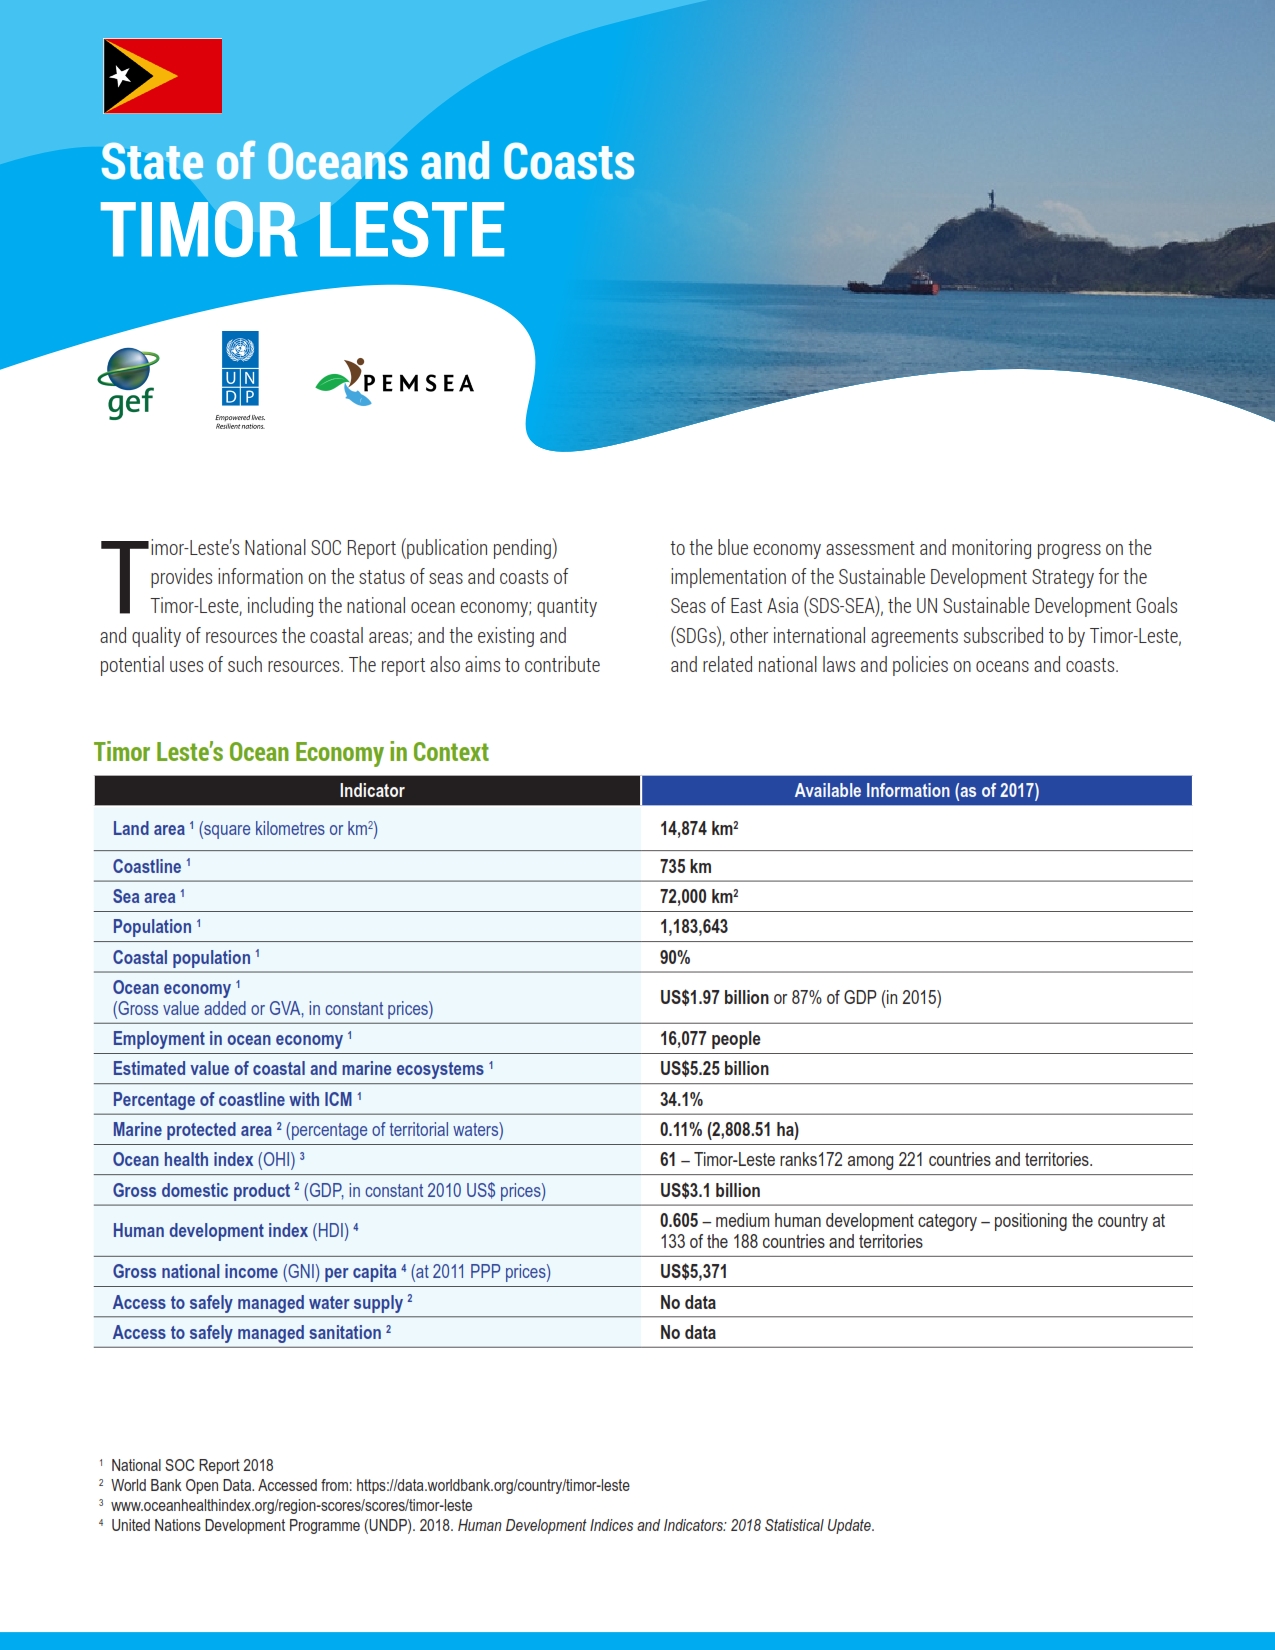 State of Oceans and Coasts of Timor-Leste